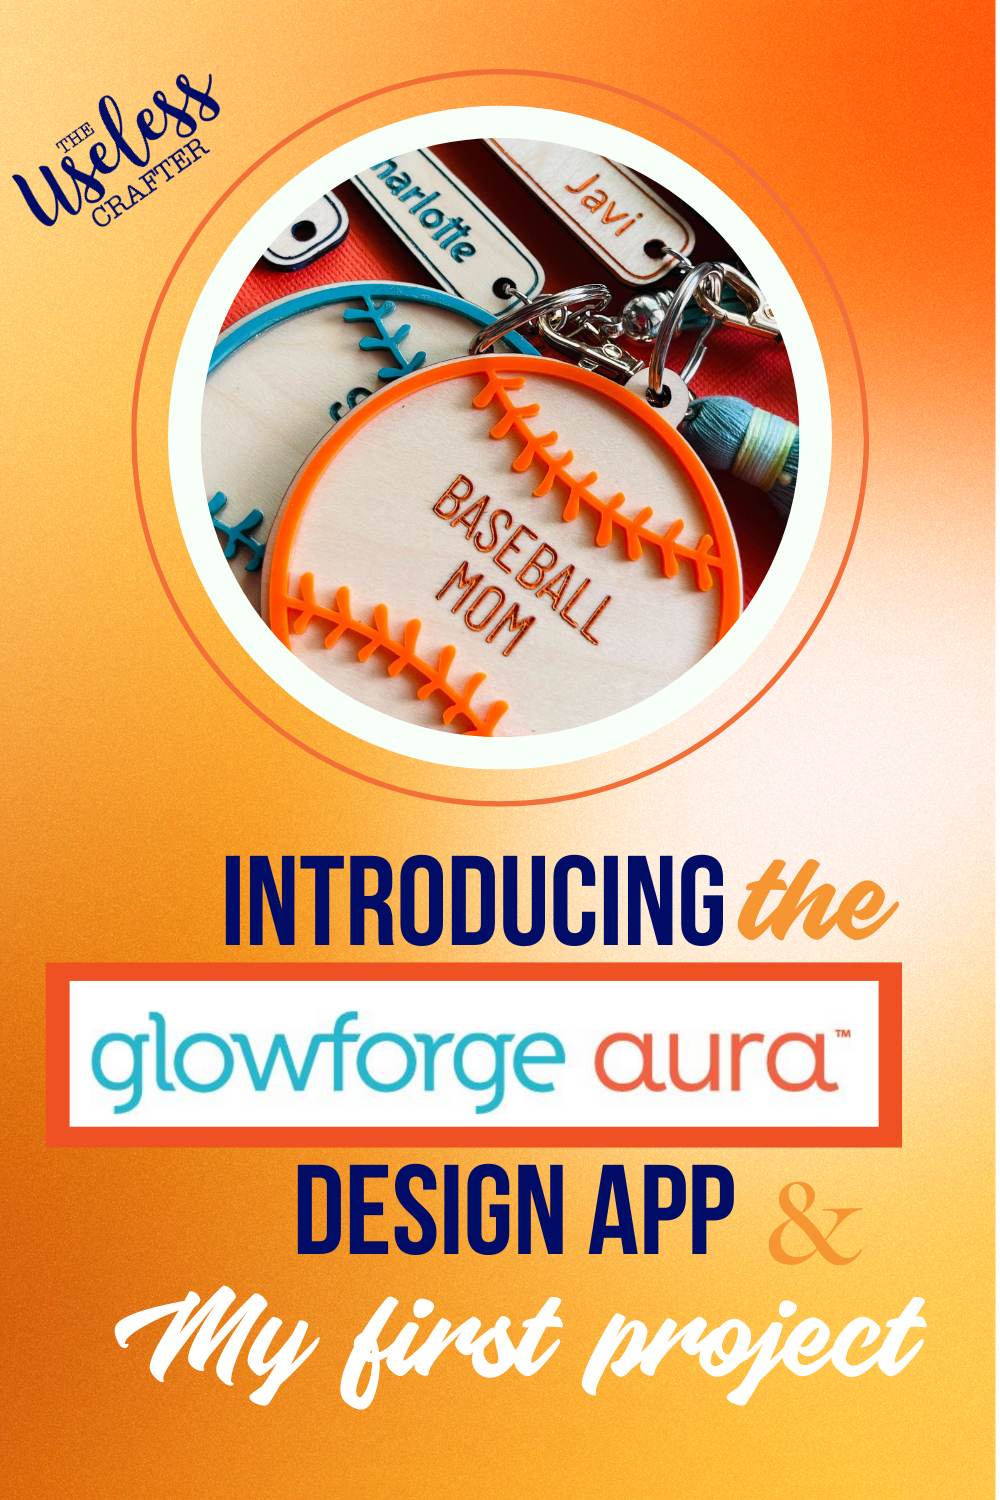 Glowforge Aura Laser Guide - Apps on Google Play